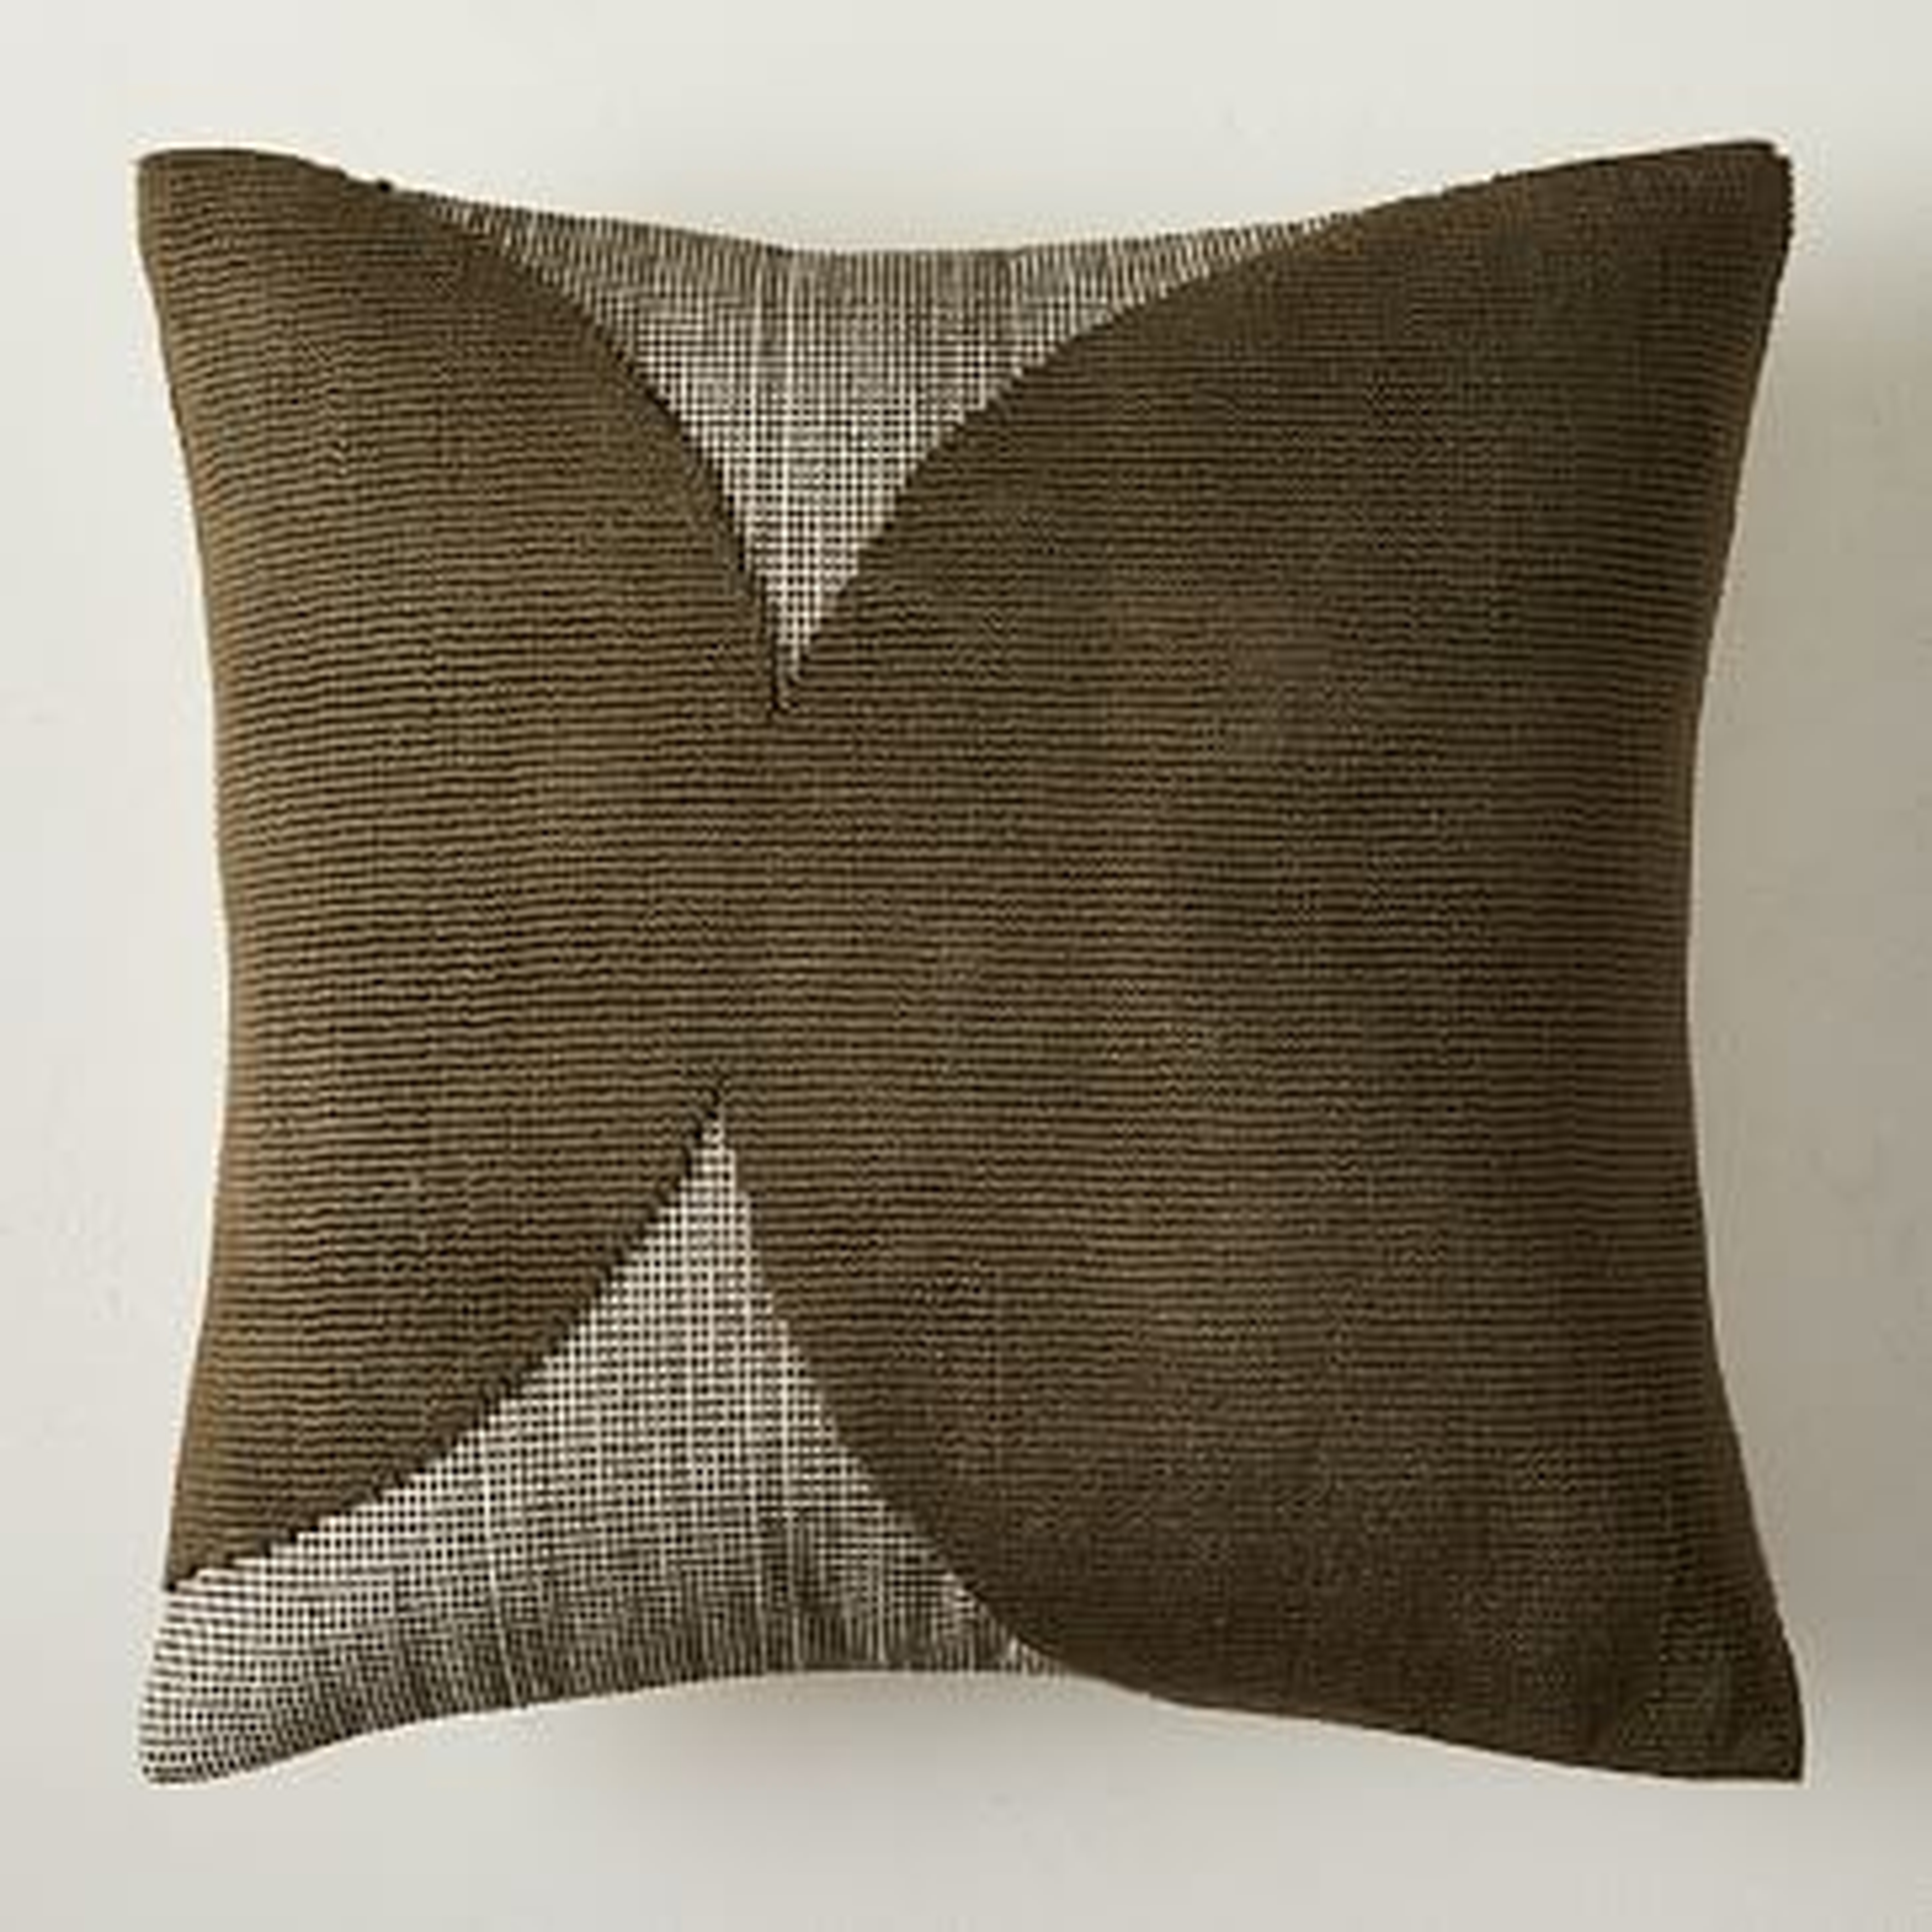 Loomed Loops Pillow Cover, Dark Olive, 20x20, Set of 2 - West Elm